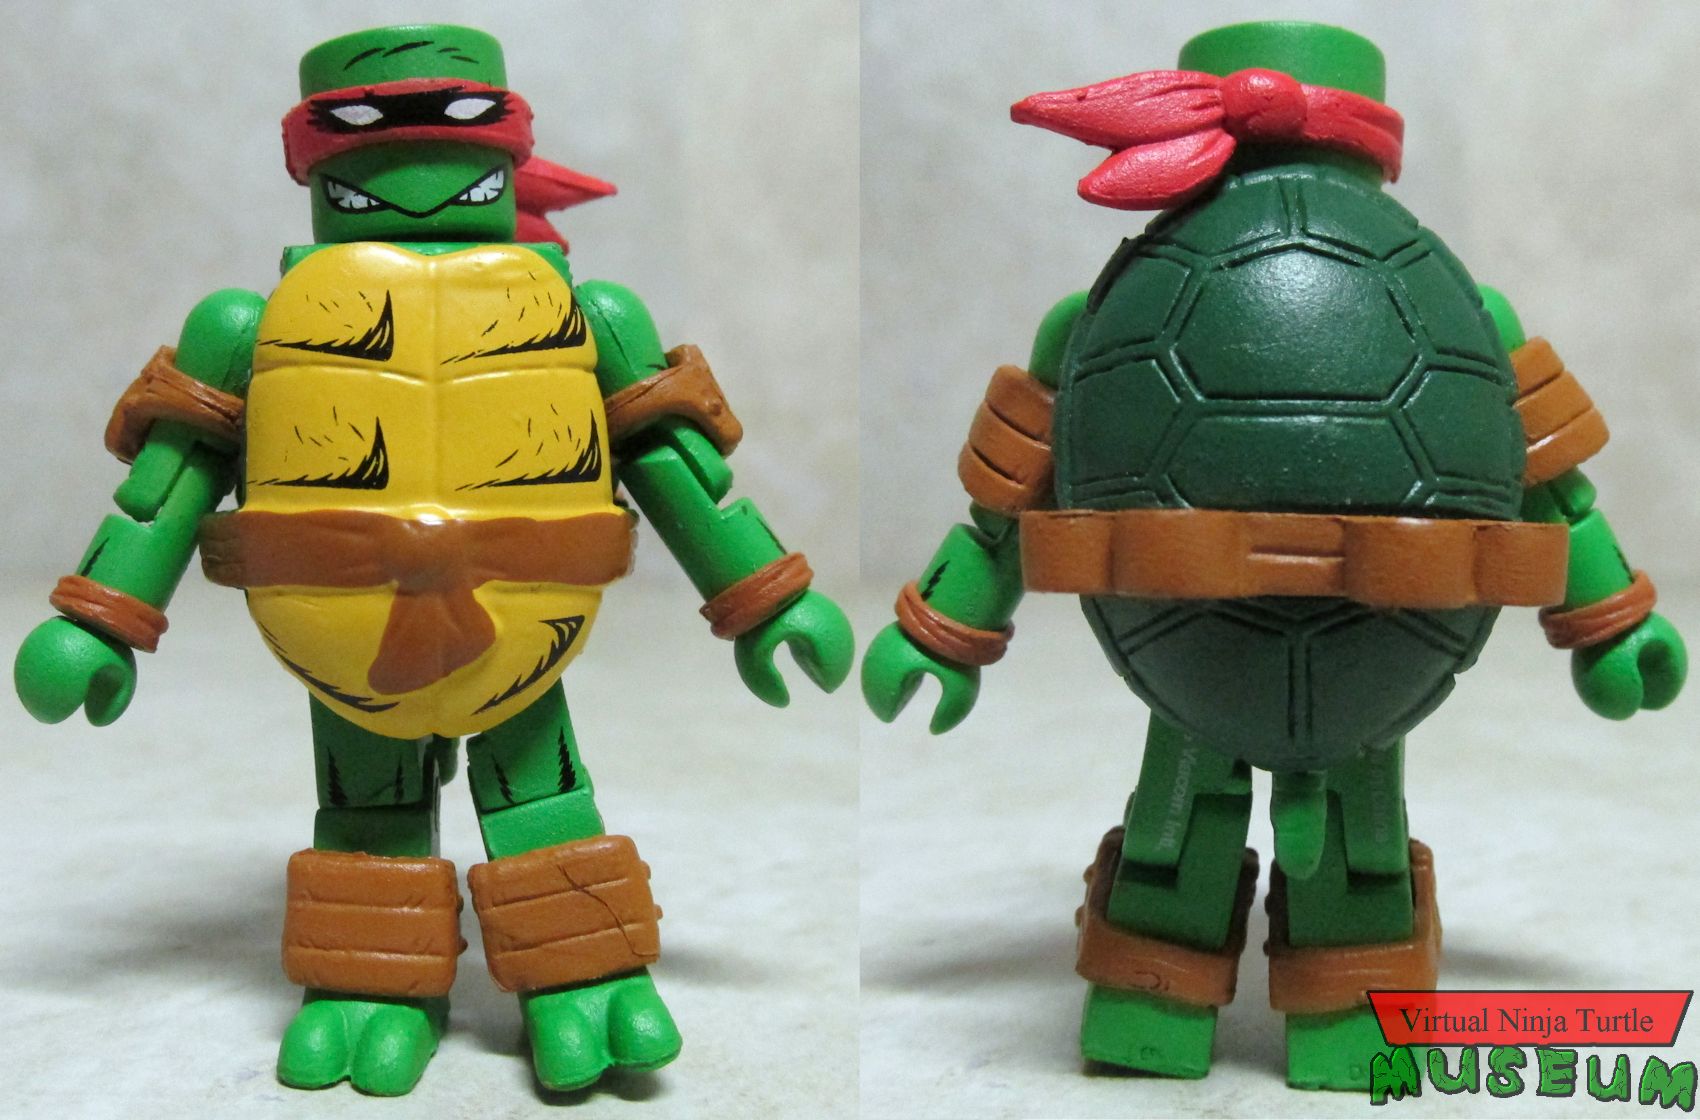 Mirage Michelangelo front and back